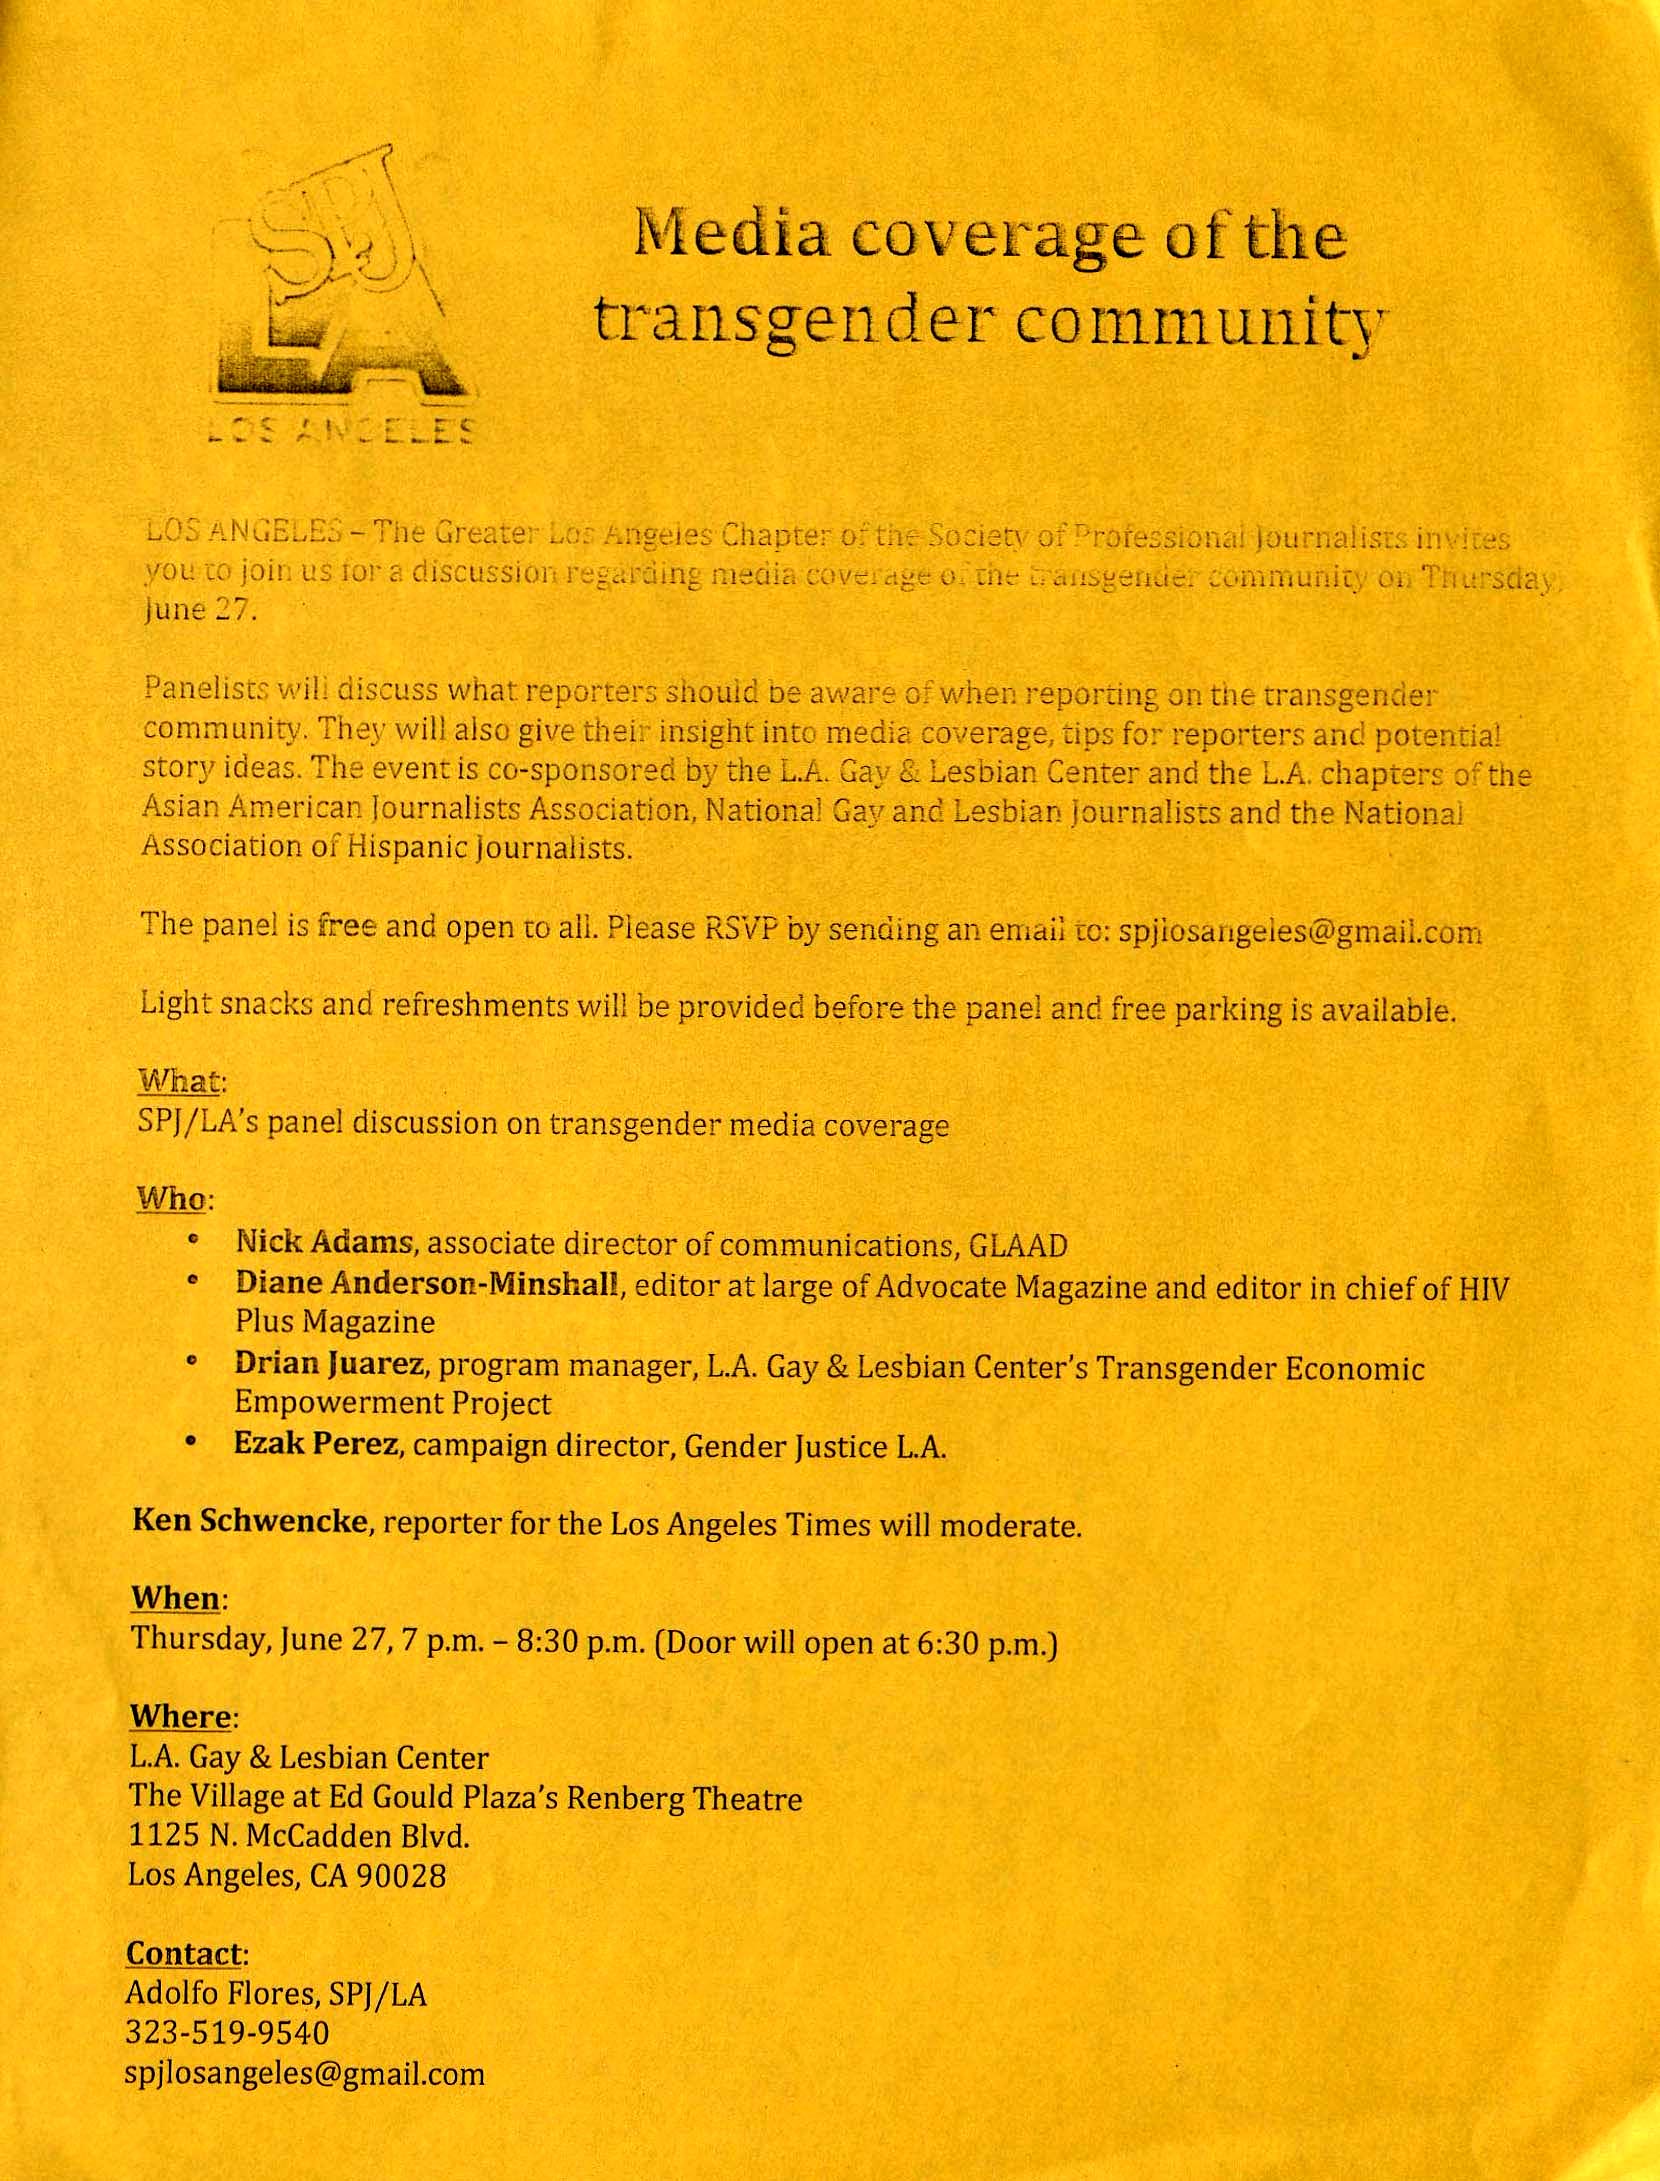 An event flyer about media coverage of the transgender community